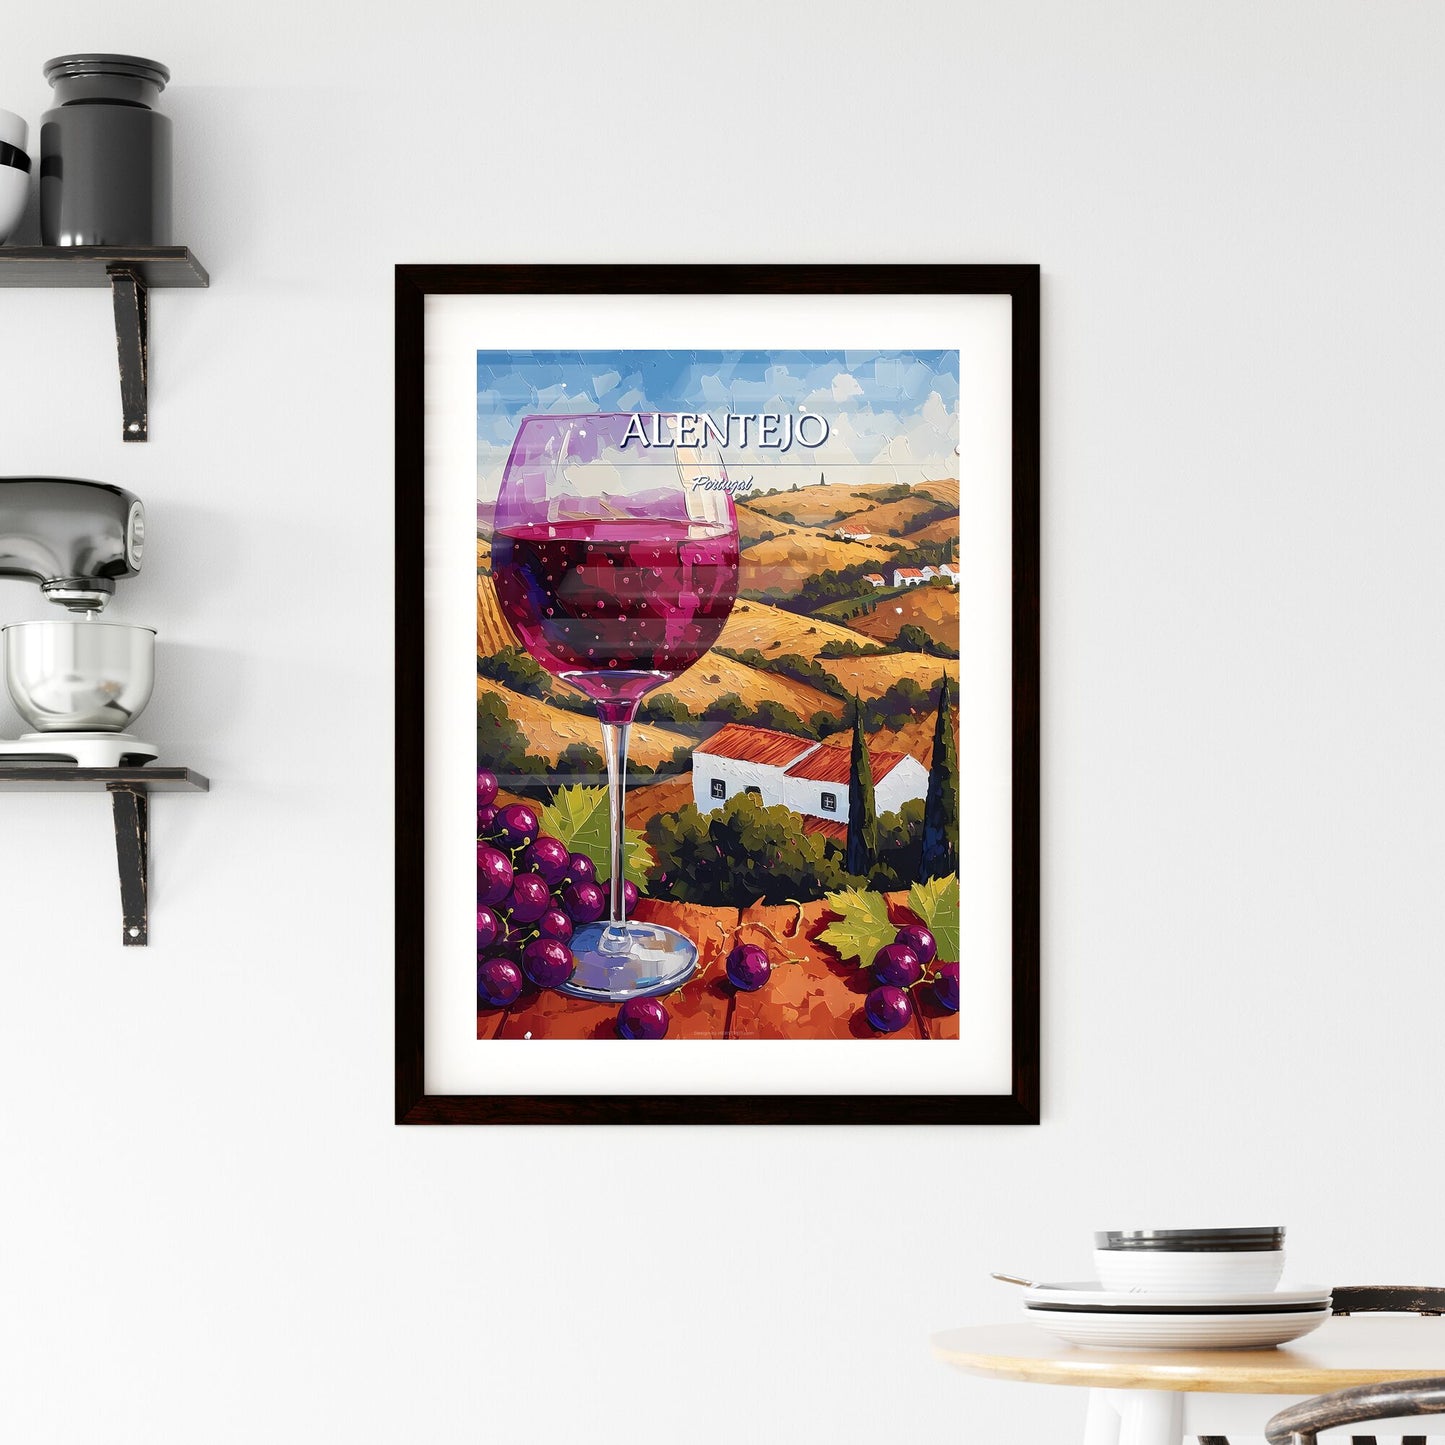 Alentejo, Portugal - Art print of a glass of wine and grapes on a table Default Title